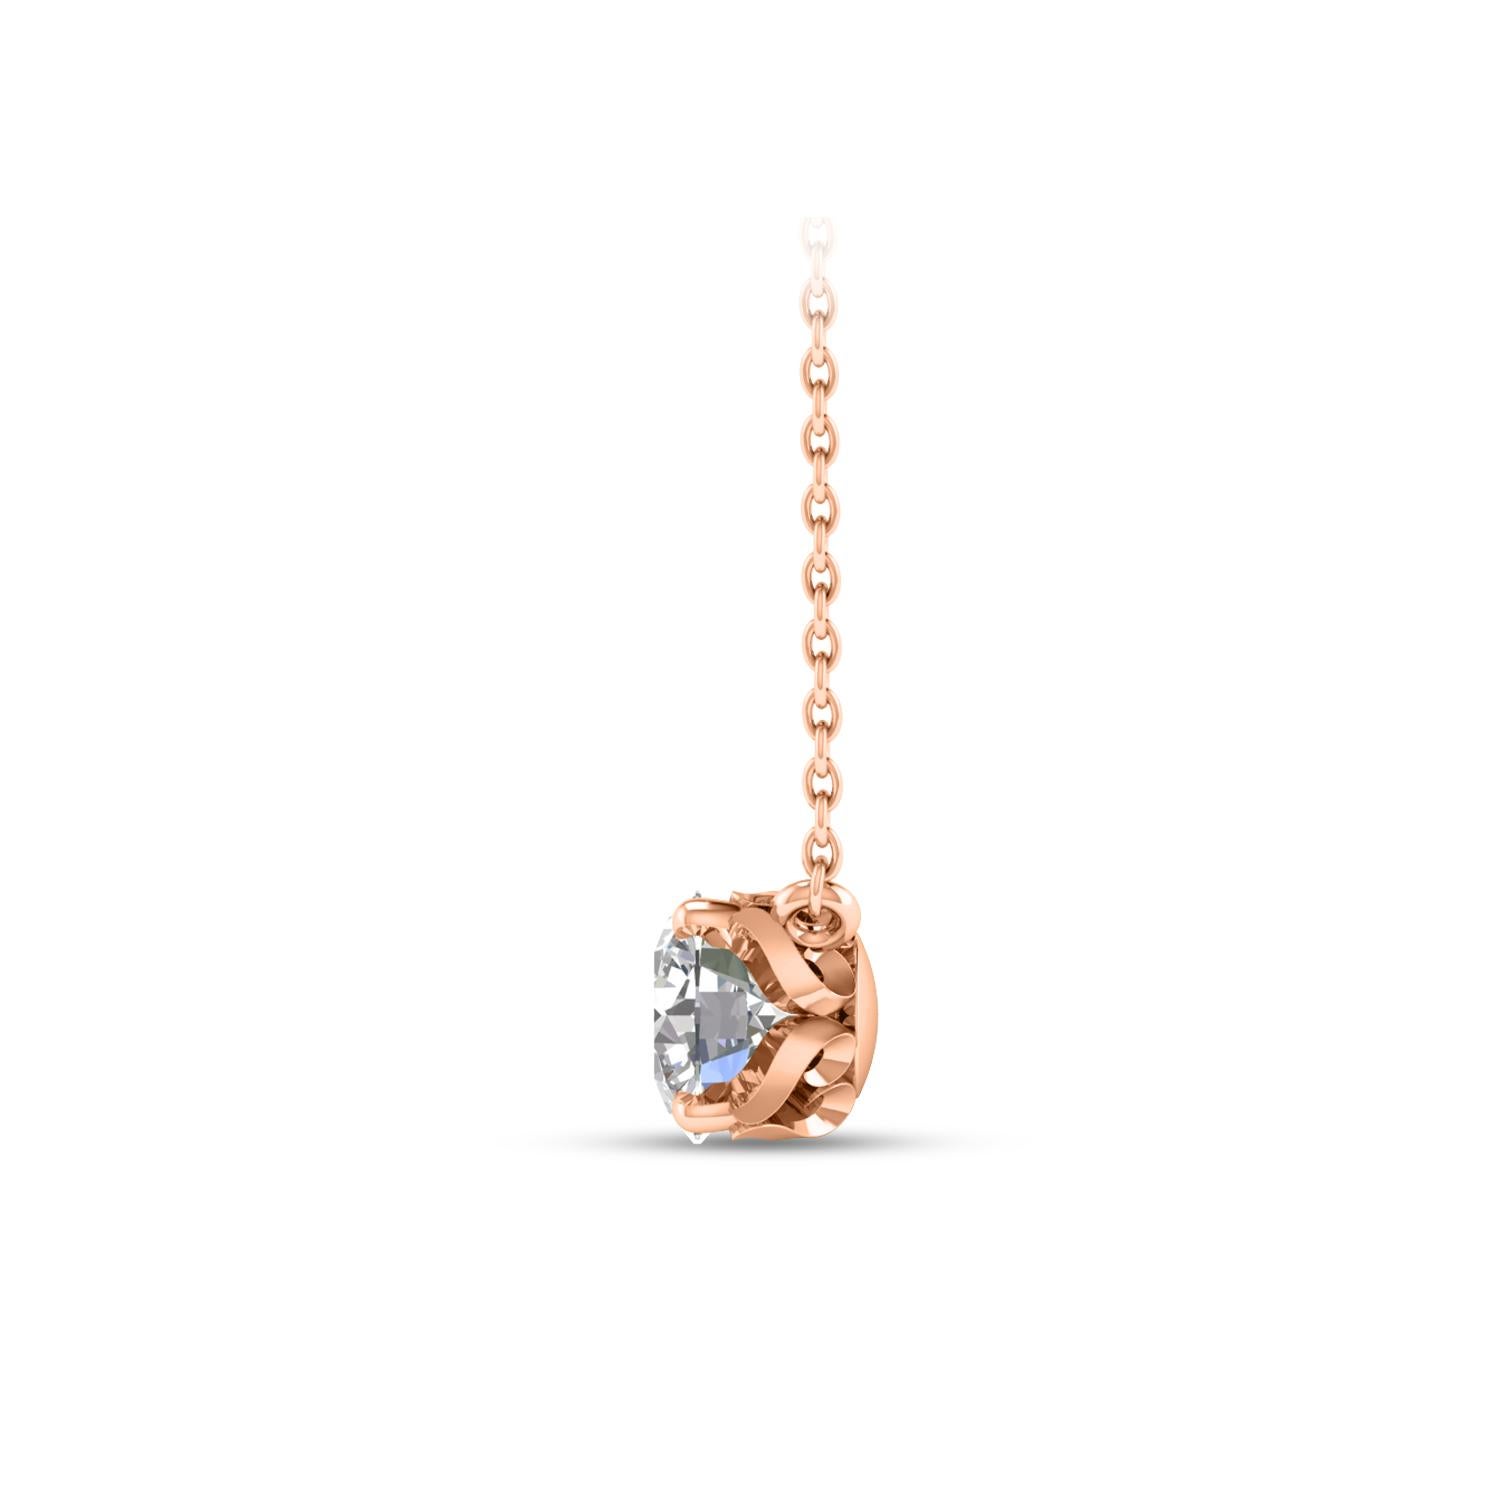  This solitaire diamond necklace features a single, brilliant-cut 0.34 carat diamond in prong setting crafted in 18 KT rose gold. This elegant necklace includes a 20-inch cable chain with extender at 18-inch.

(Carat weights may vary slightly due to